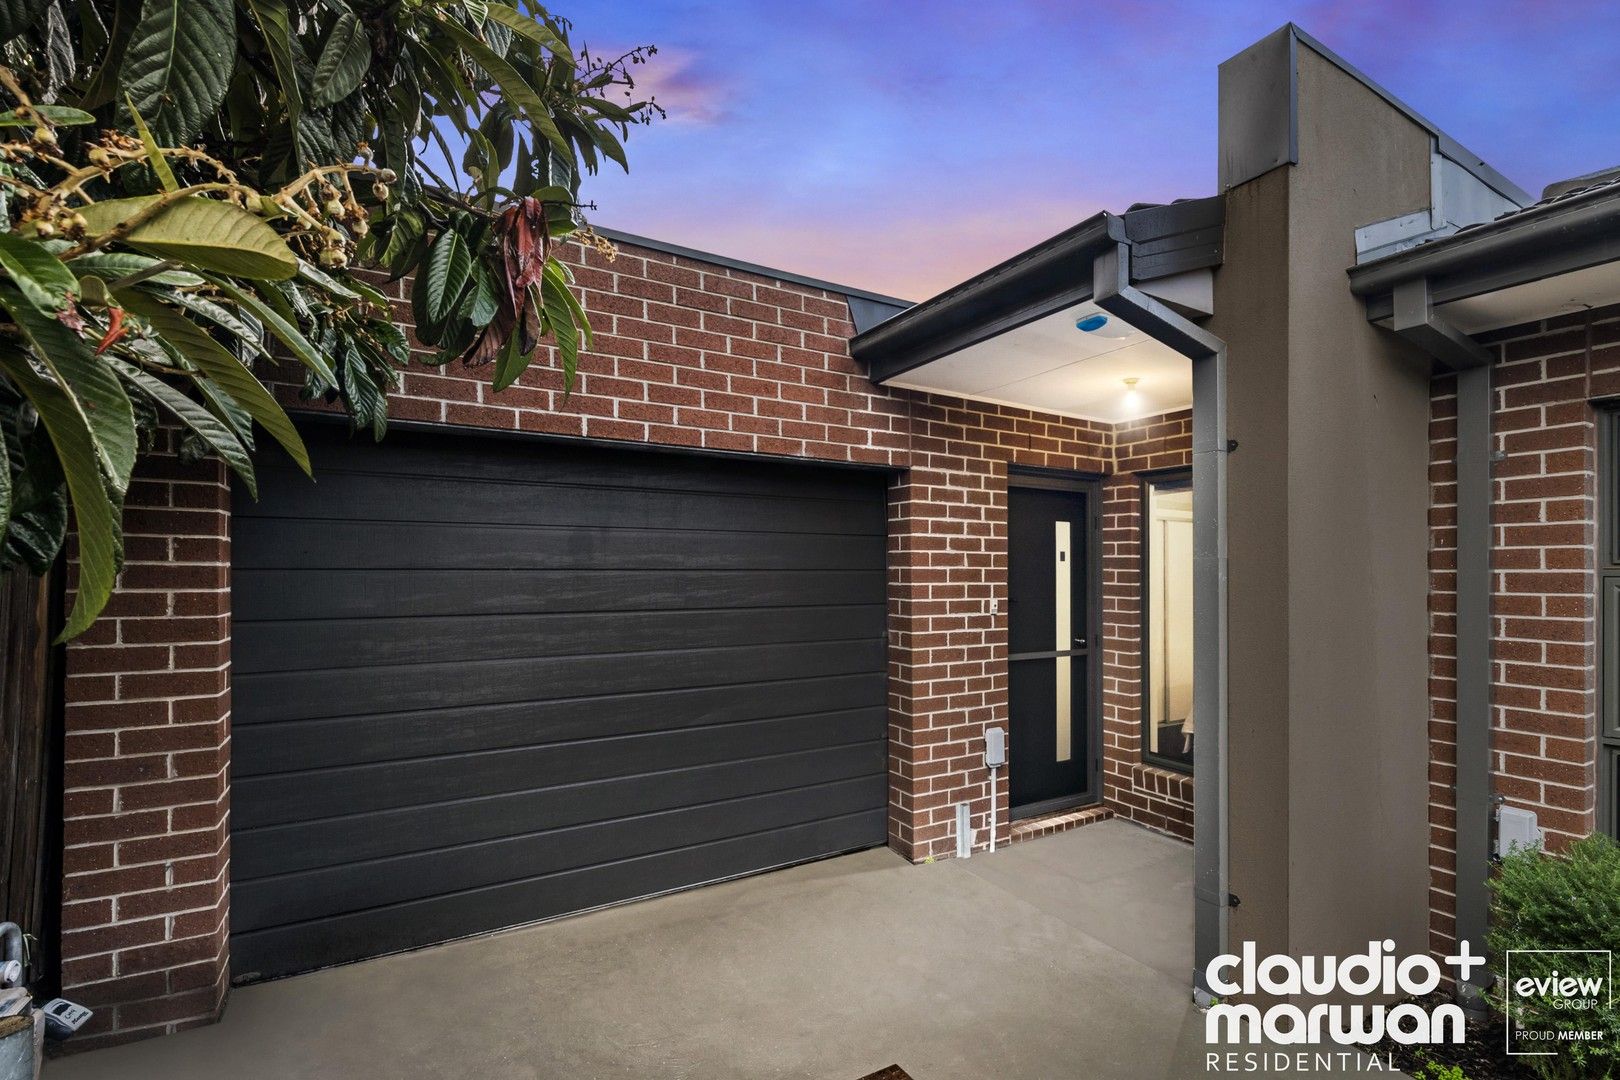 3 bedrooms Apartment / Unit / Flat in 3/122 Daley Street GLENROY VIC, 3046